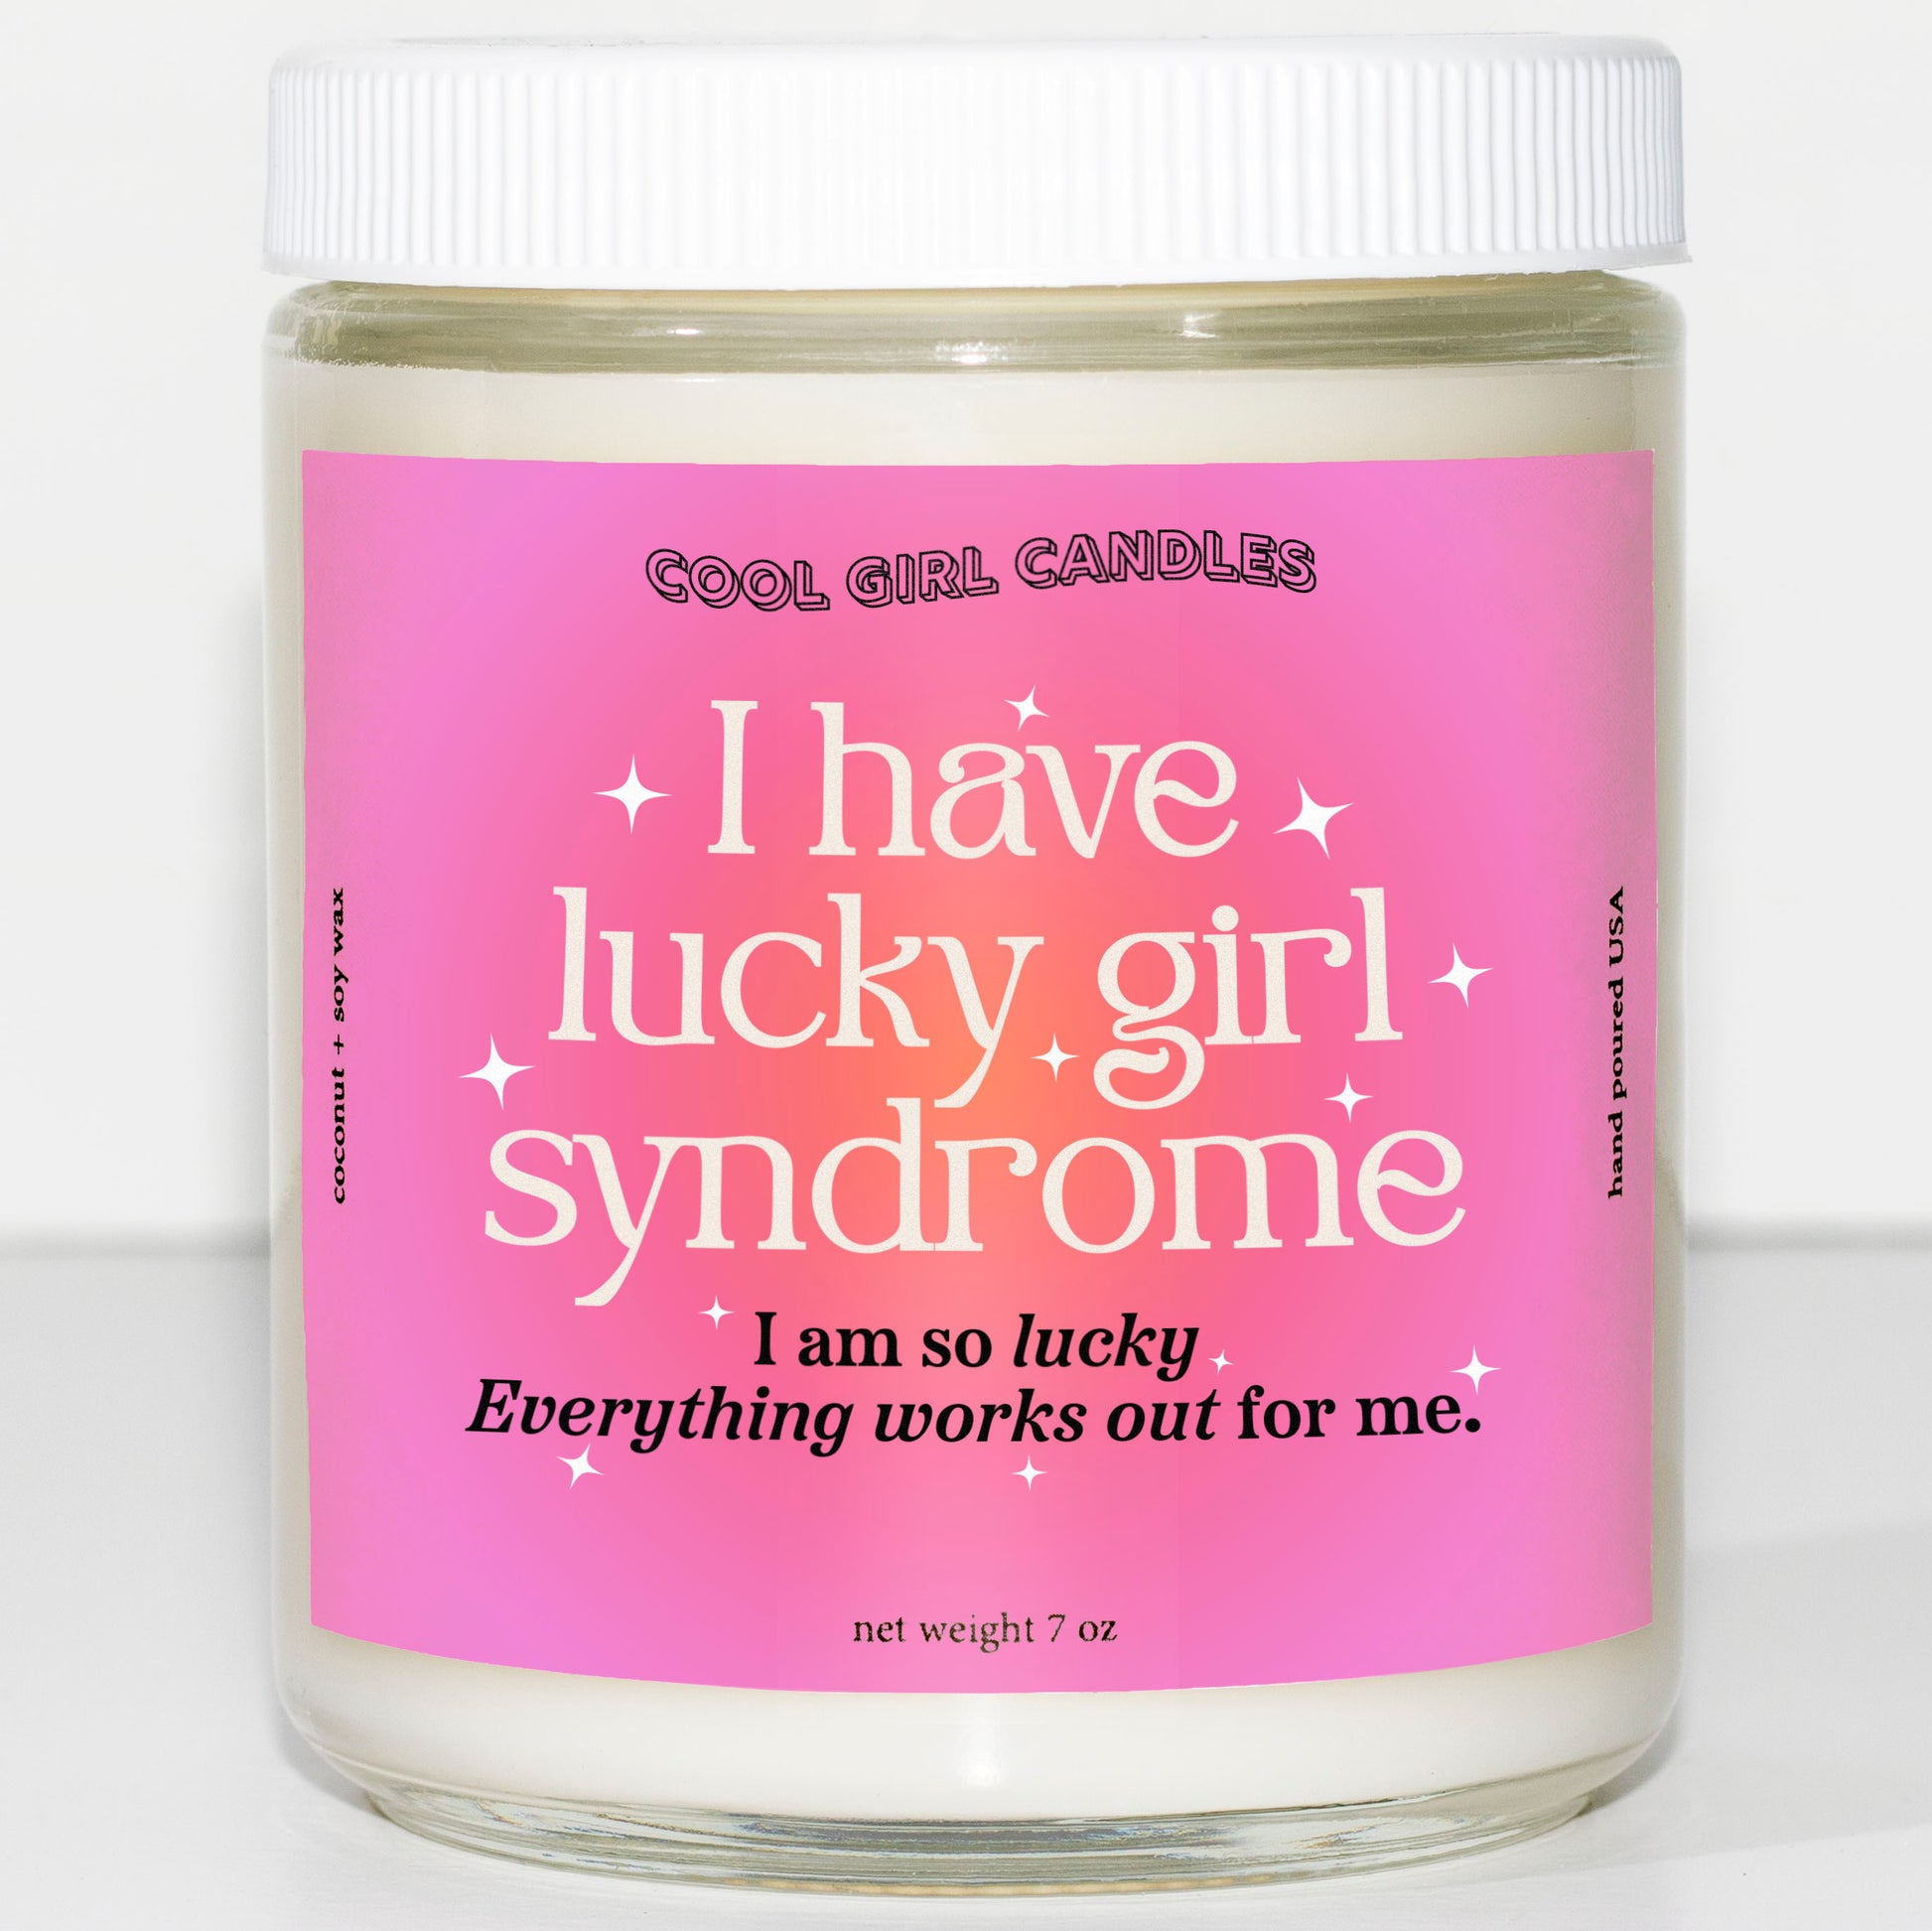 cute aesthetic lucky girl syndrome candle to manifest the fact that you're the luckiest girl in the world. A pink gradient cute candle with good vibes.